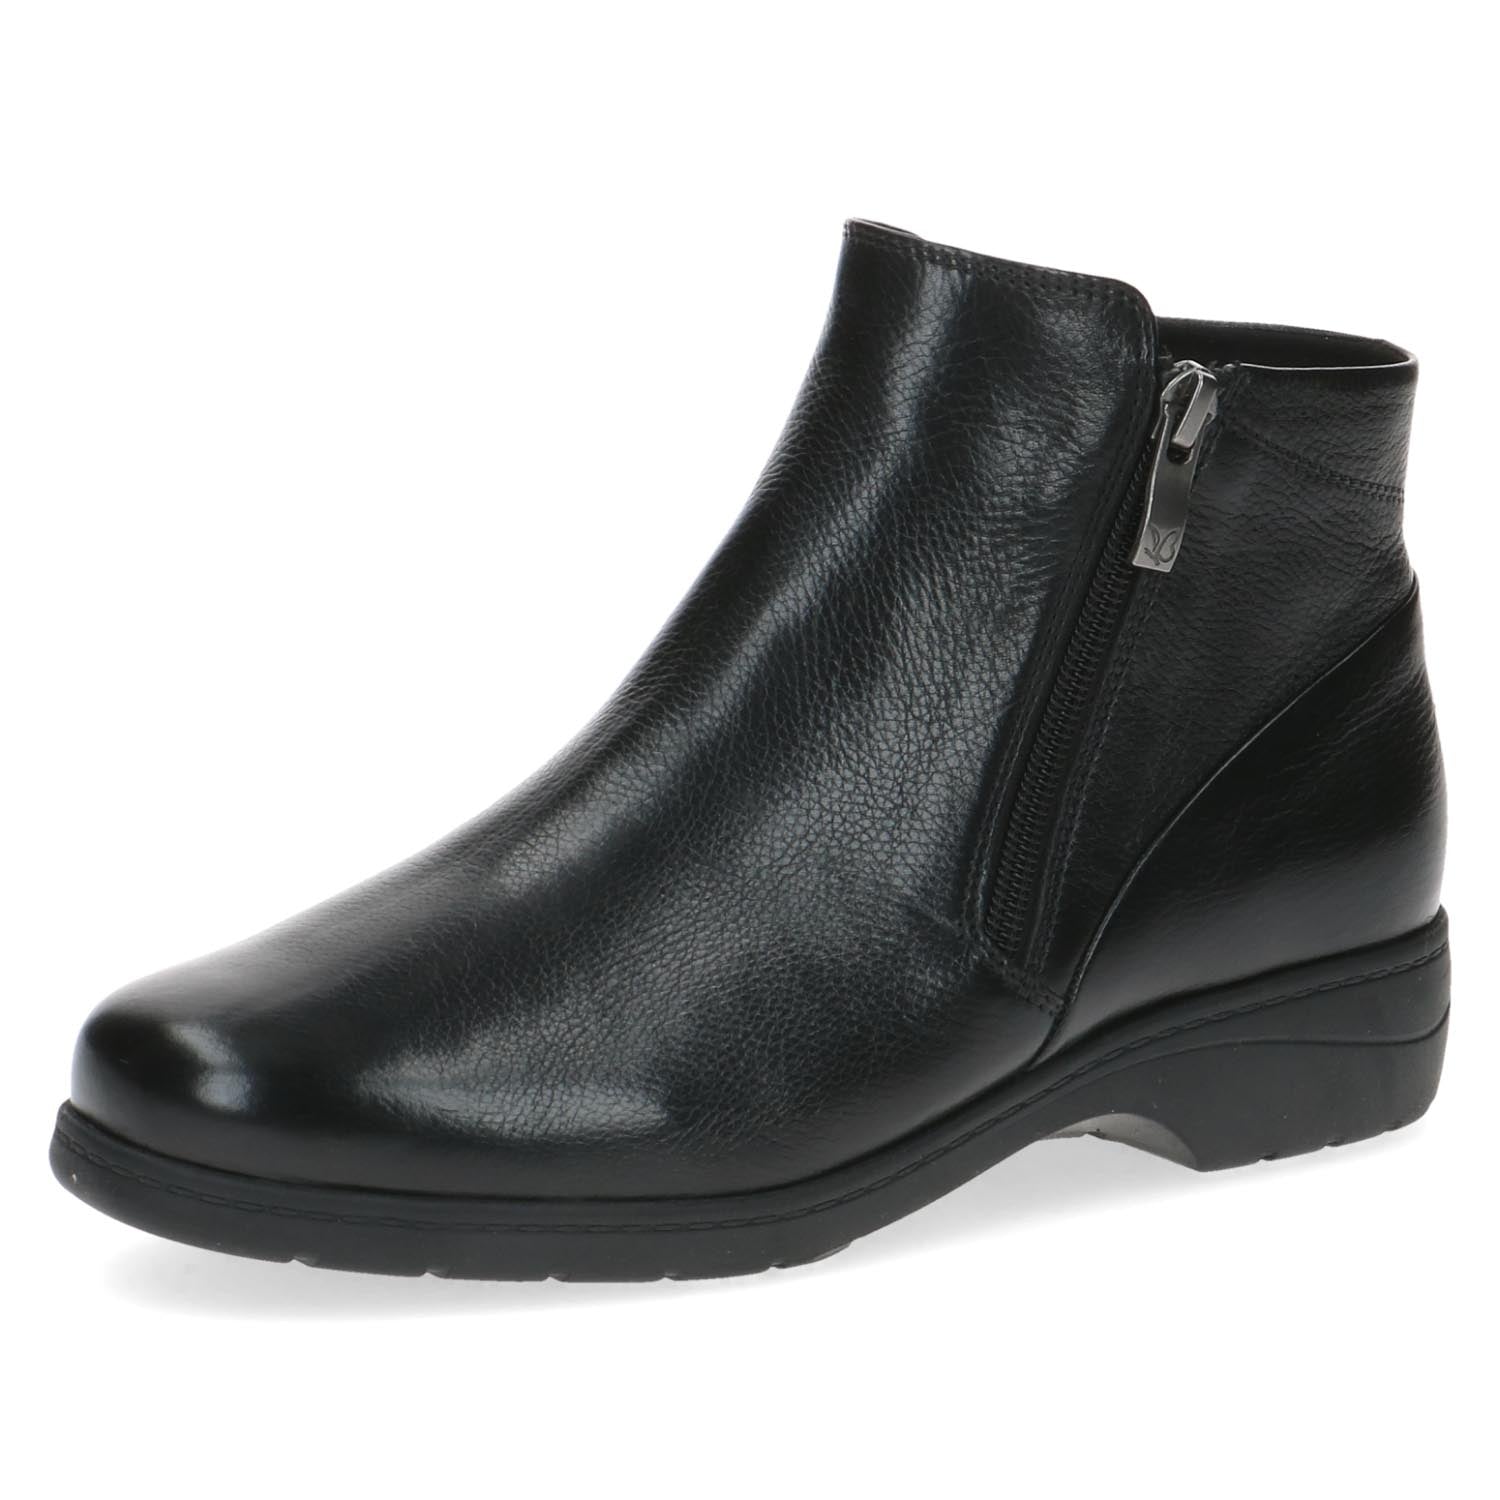 Angle shot showcasing the sleek design of the dual zip black ankle boot.